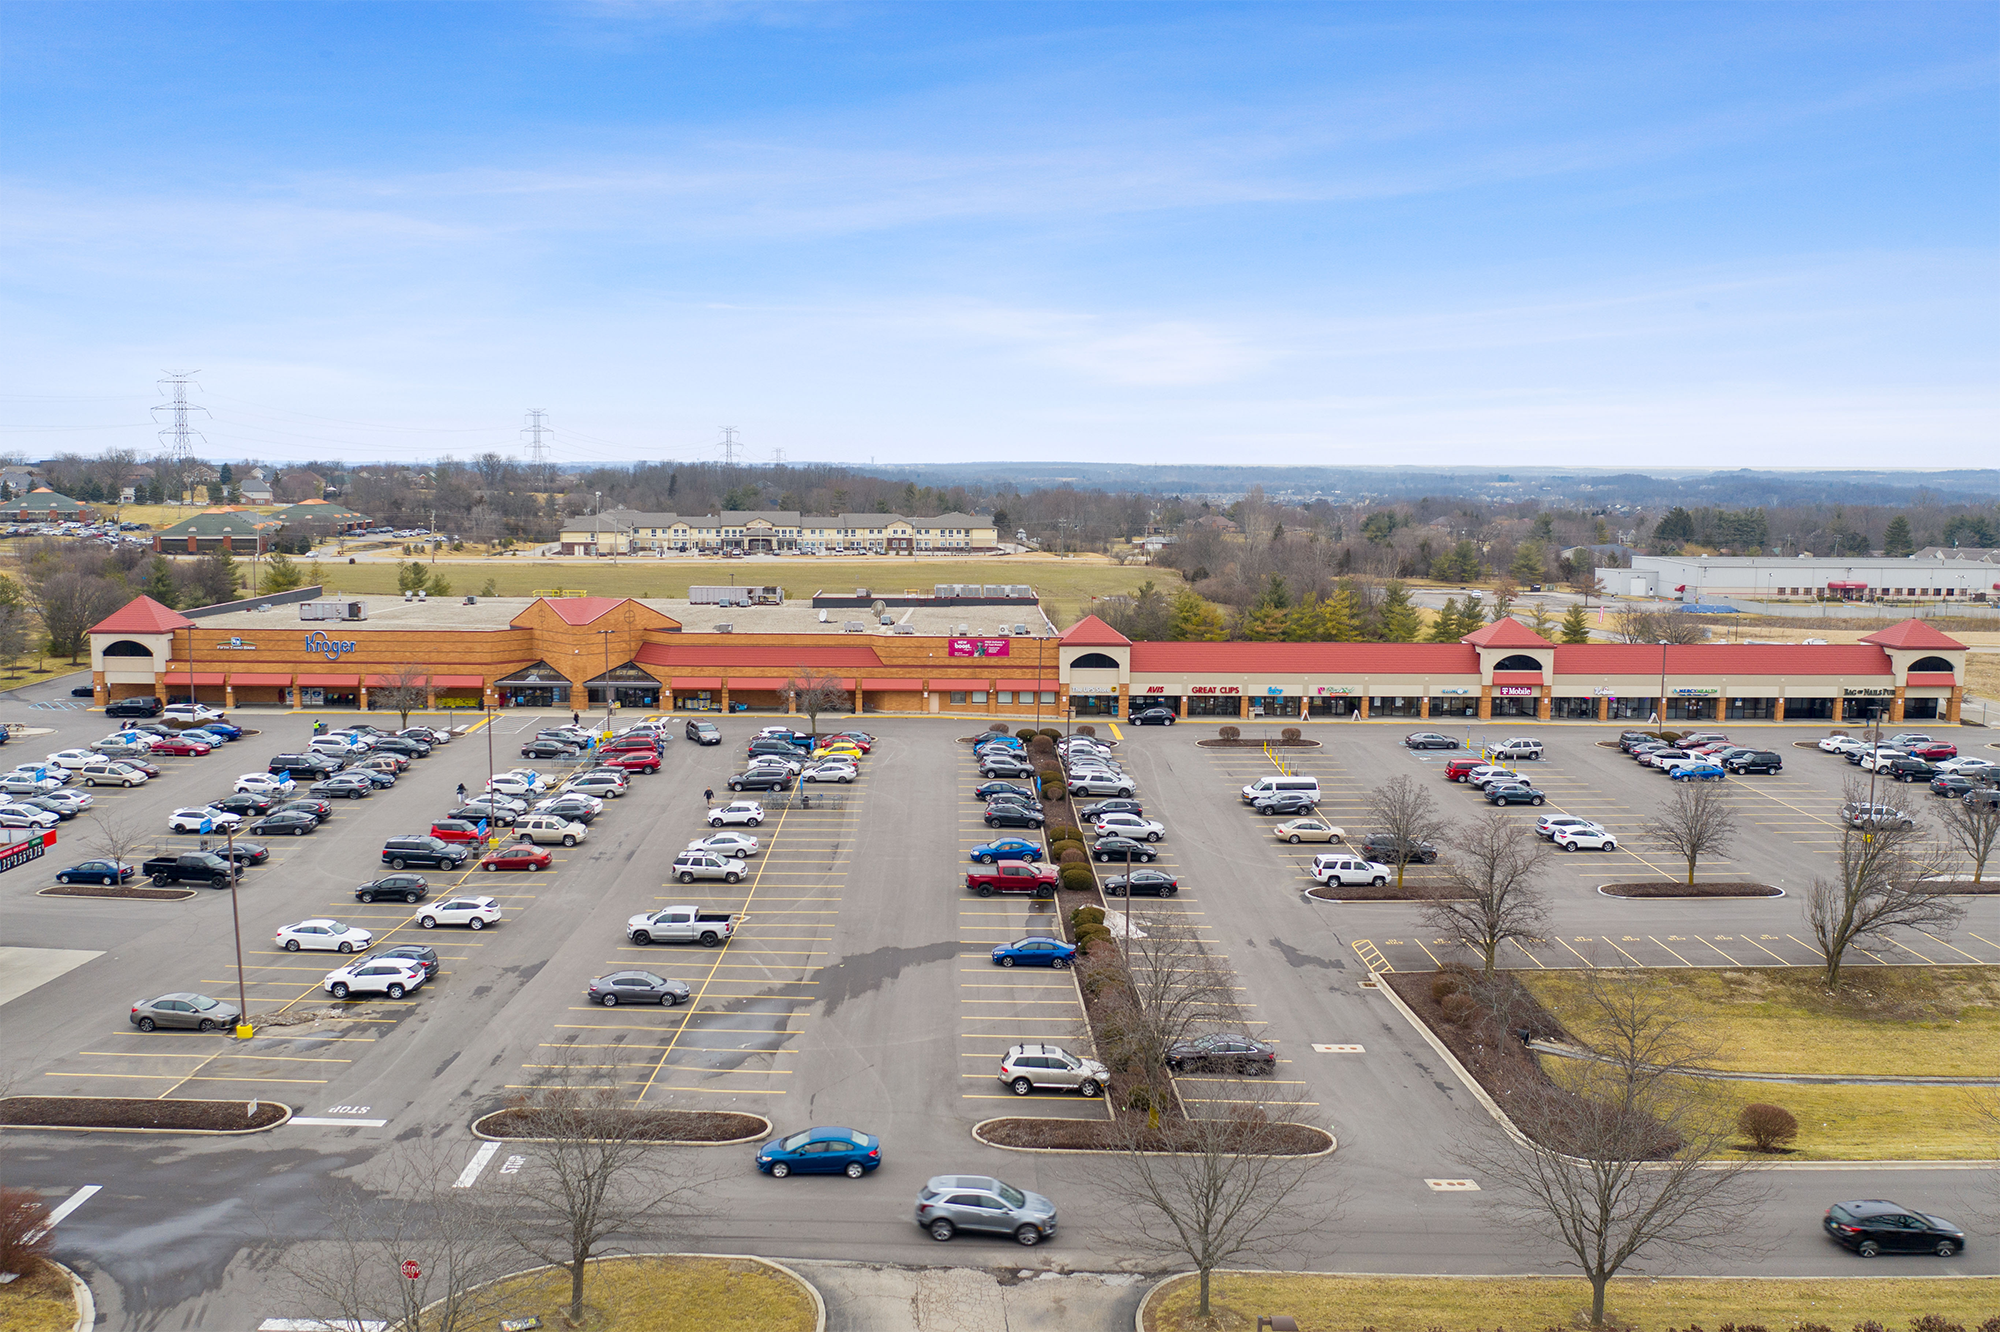 Drone view of Shoppes of Mason storefronts and parking.